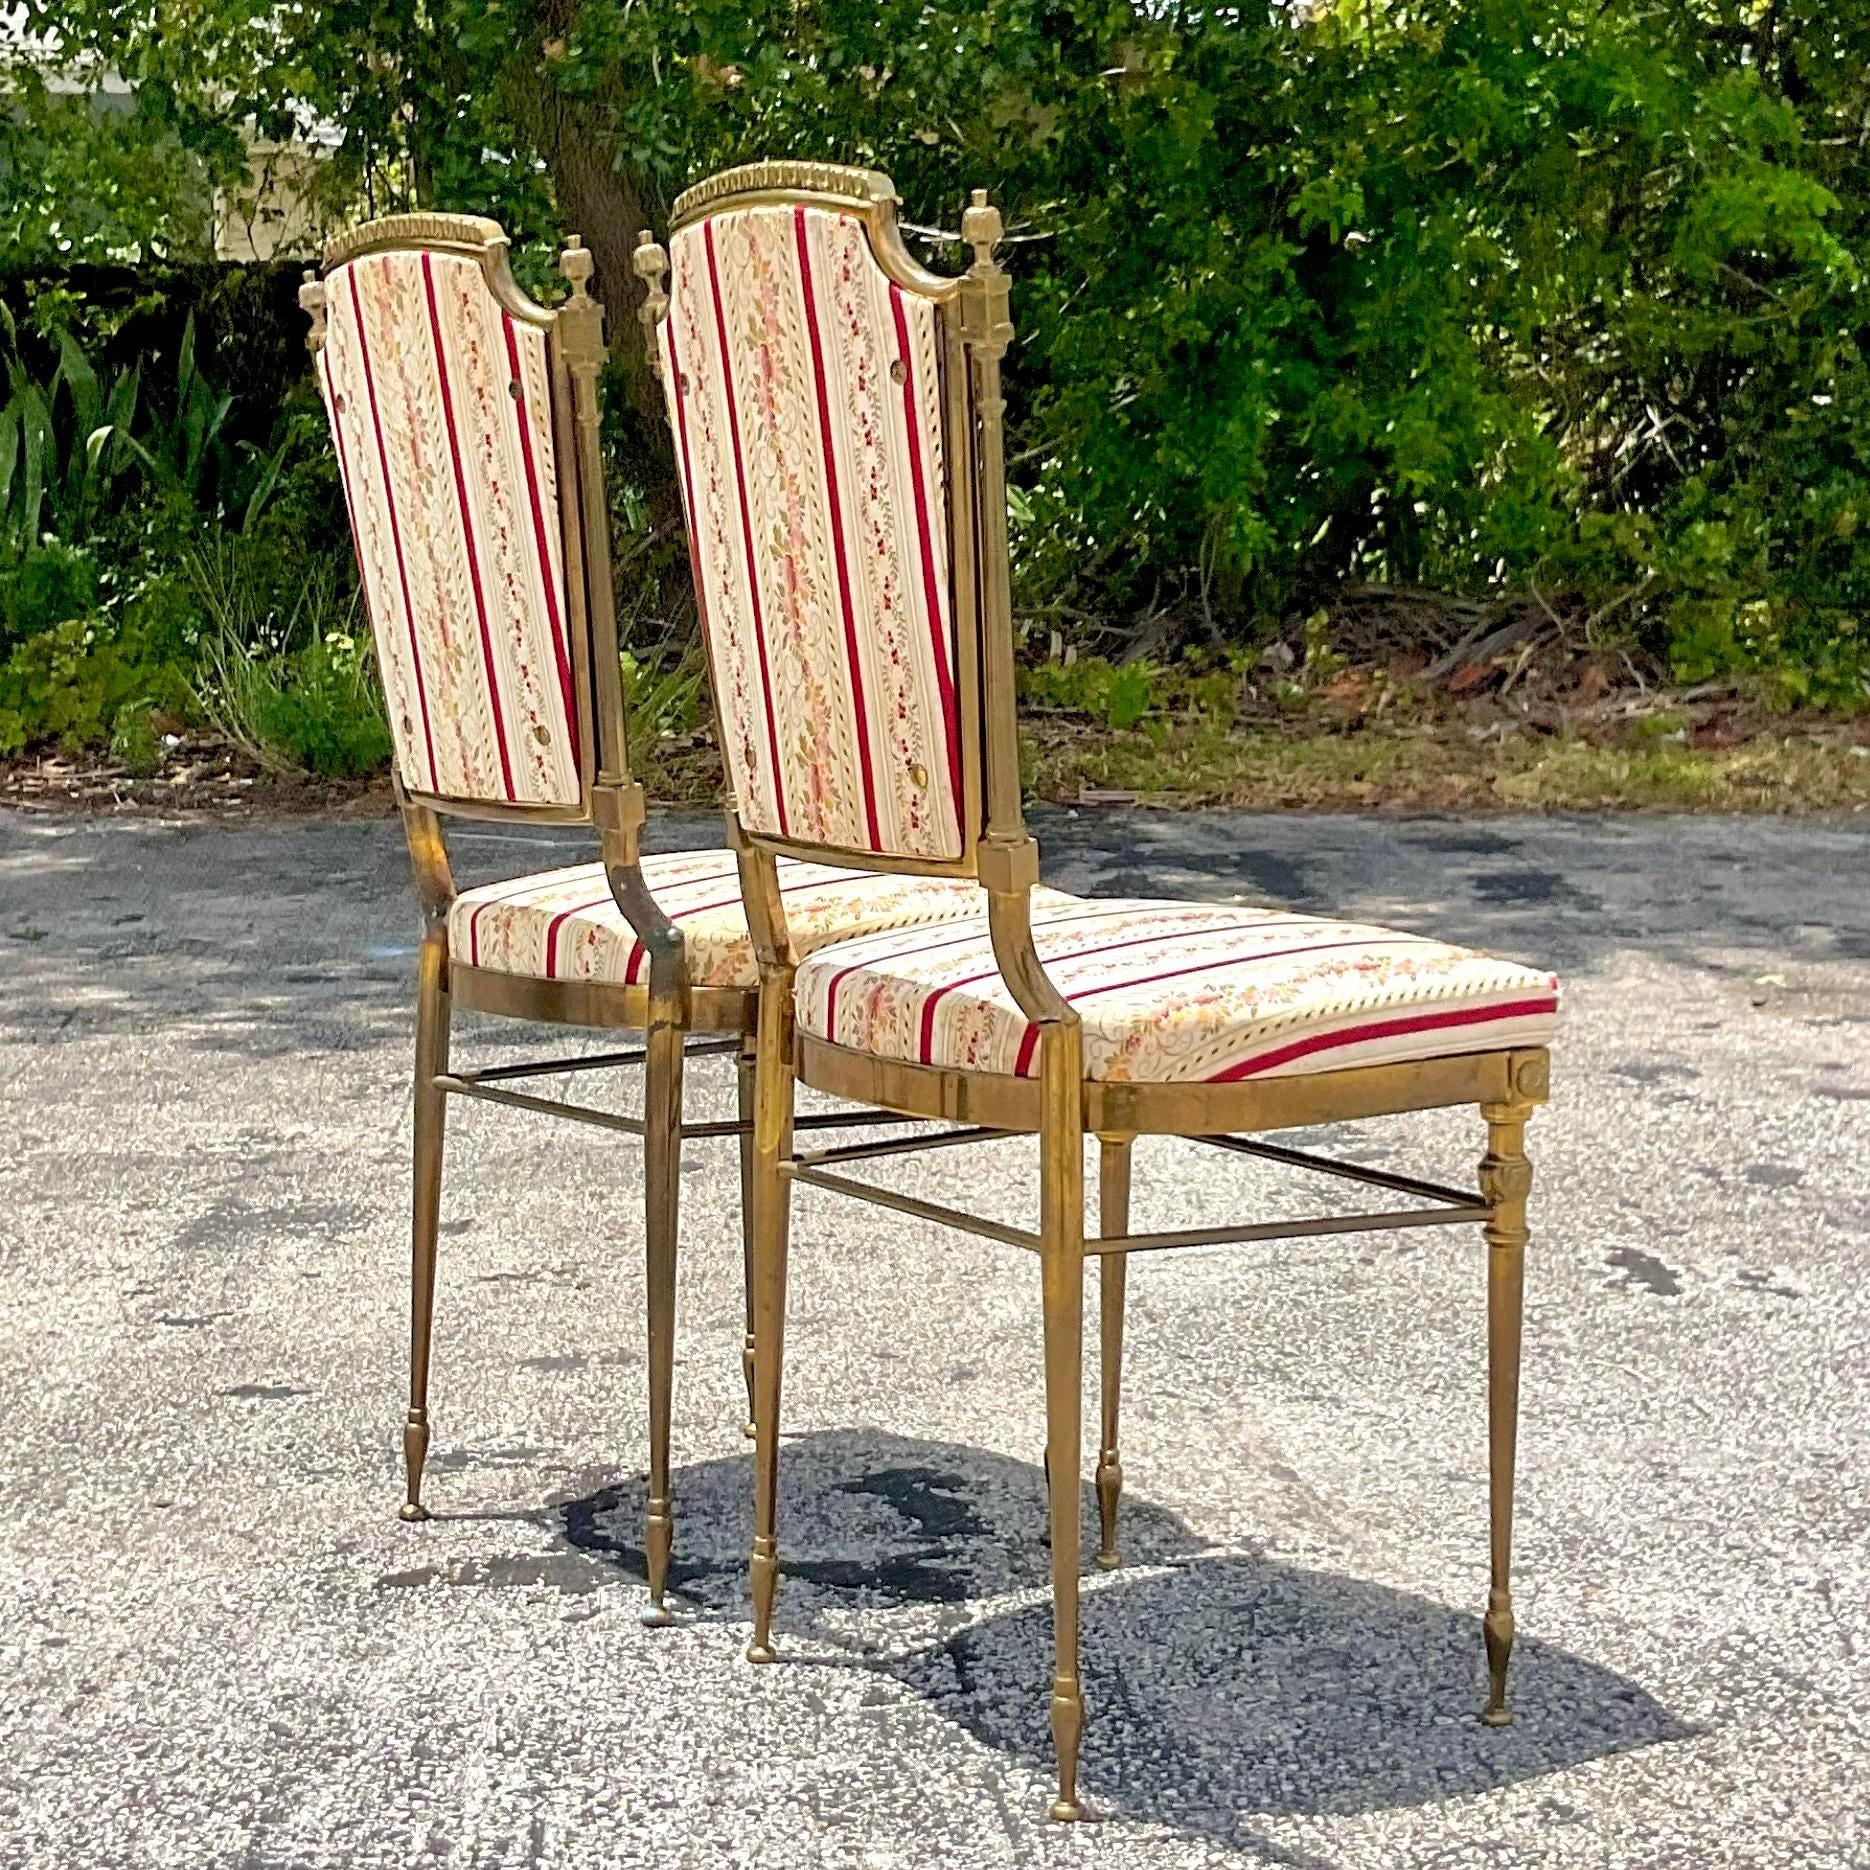 20th Century Vintage Italian Brass Charvari Chairs - a Pair For Sale